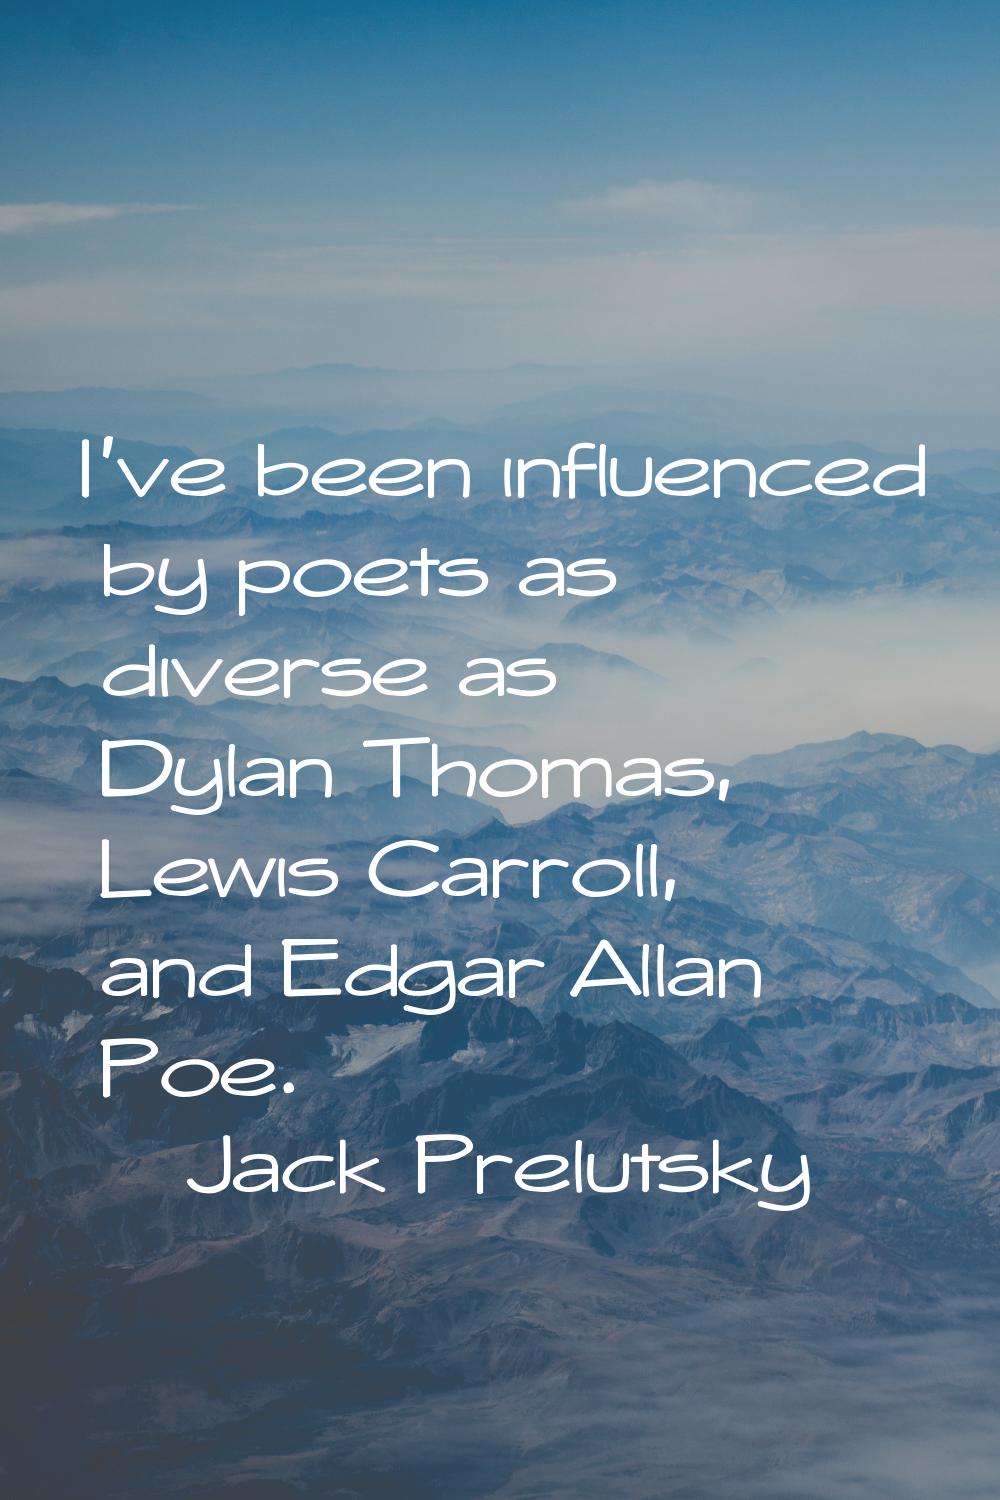 I've been influenced by poets as diverse as Dylan Thomas, Lewis Carroll, and Edgar Allan Poe.